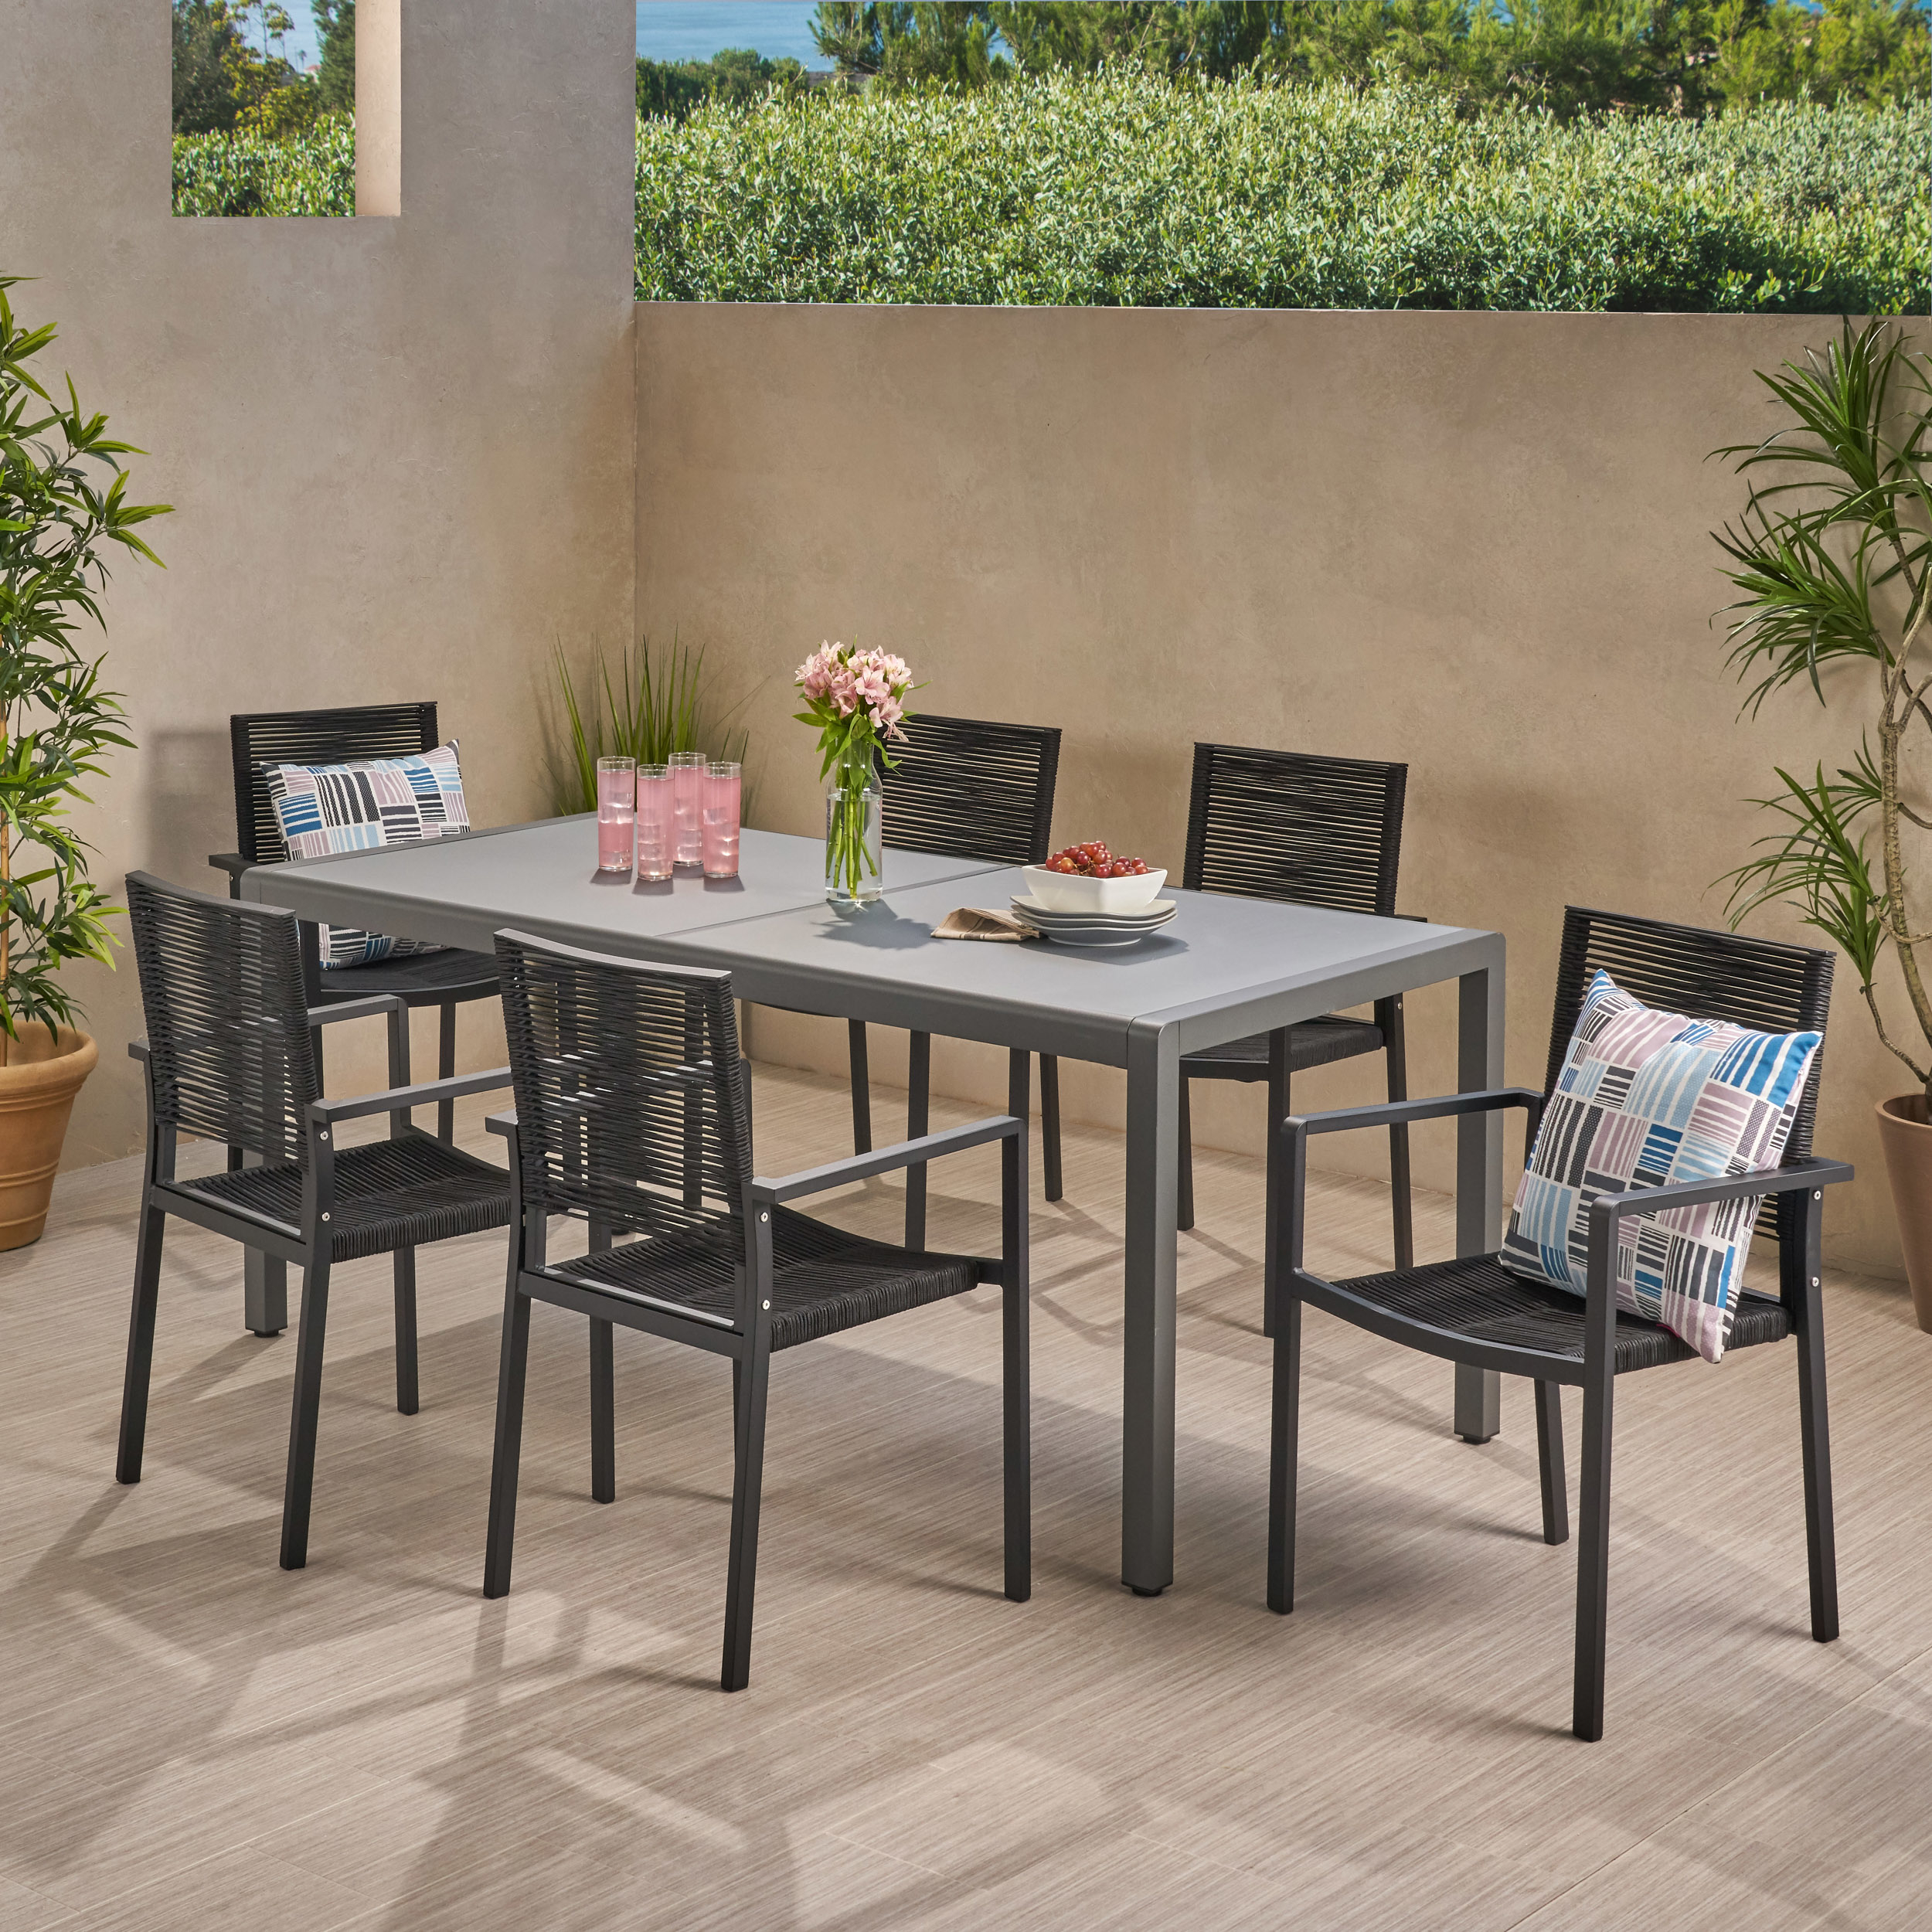 Sandy Outdoor Modern 6 Seater Aluminum Dining Set With Tempered Glass Table Top - Gun Metal Gray + Dark Gray + Black